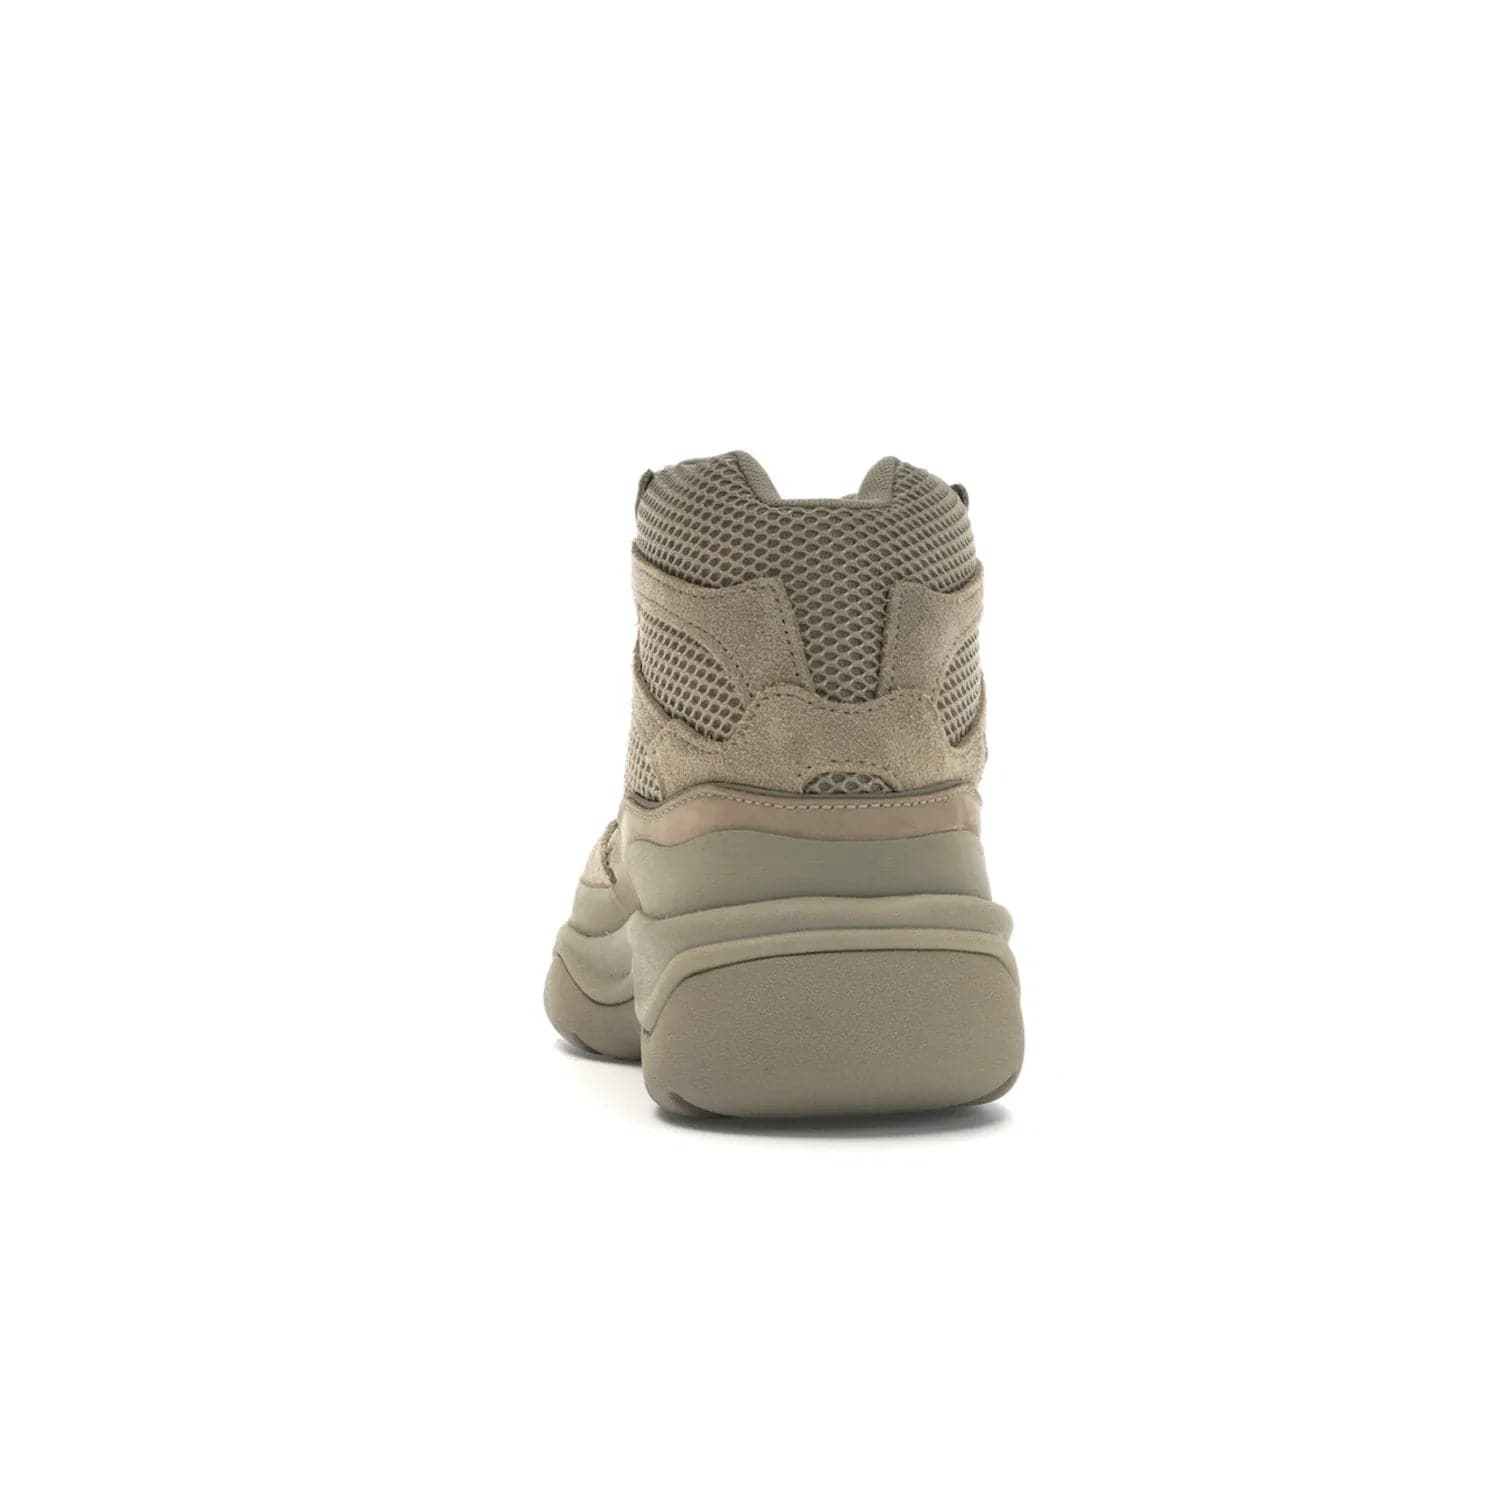 adidas Yeezy Desert Boot Rock - Image 27 - Only at www.BallersClubKickz.com - #
This season, make a fashion statement with the adidas Yeezy Desert Boot Rock. Nubuck and suede upper offers tonal style while the grooved sole provides traction and stability. Get yours in April 2019.